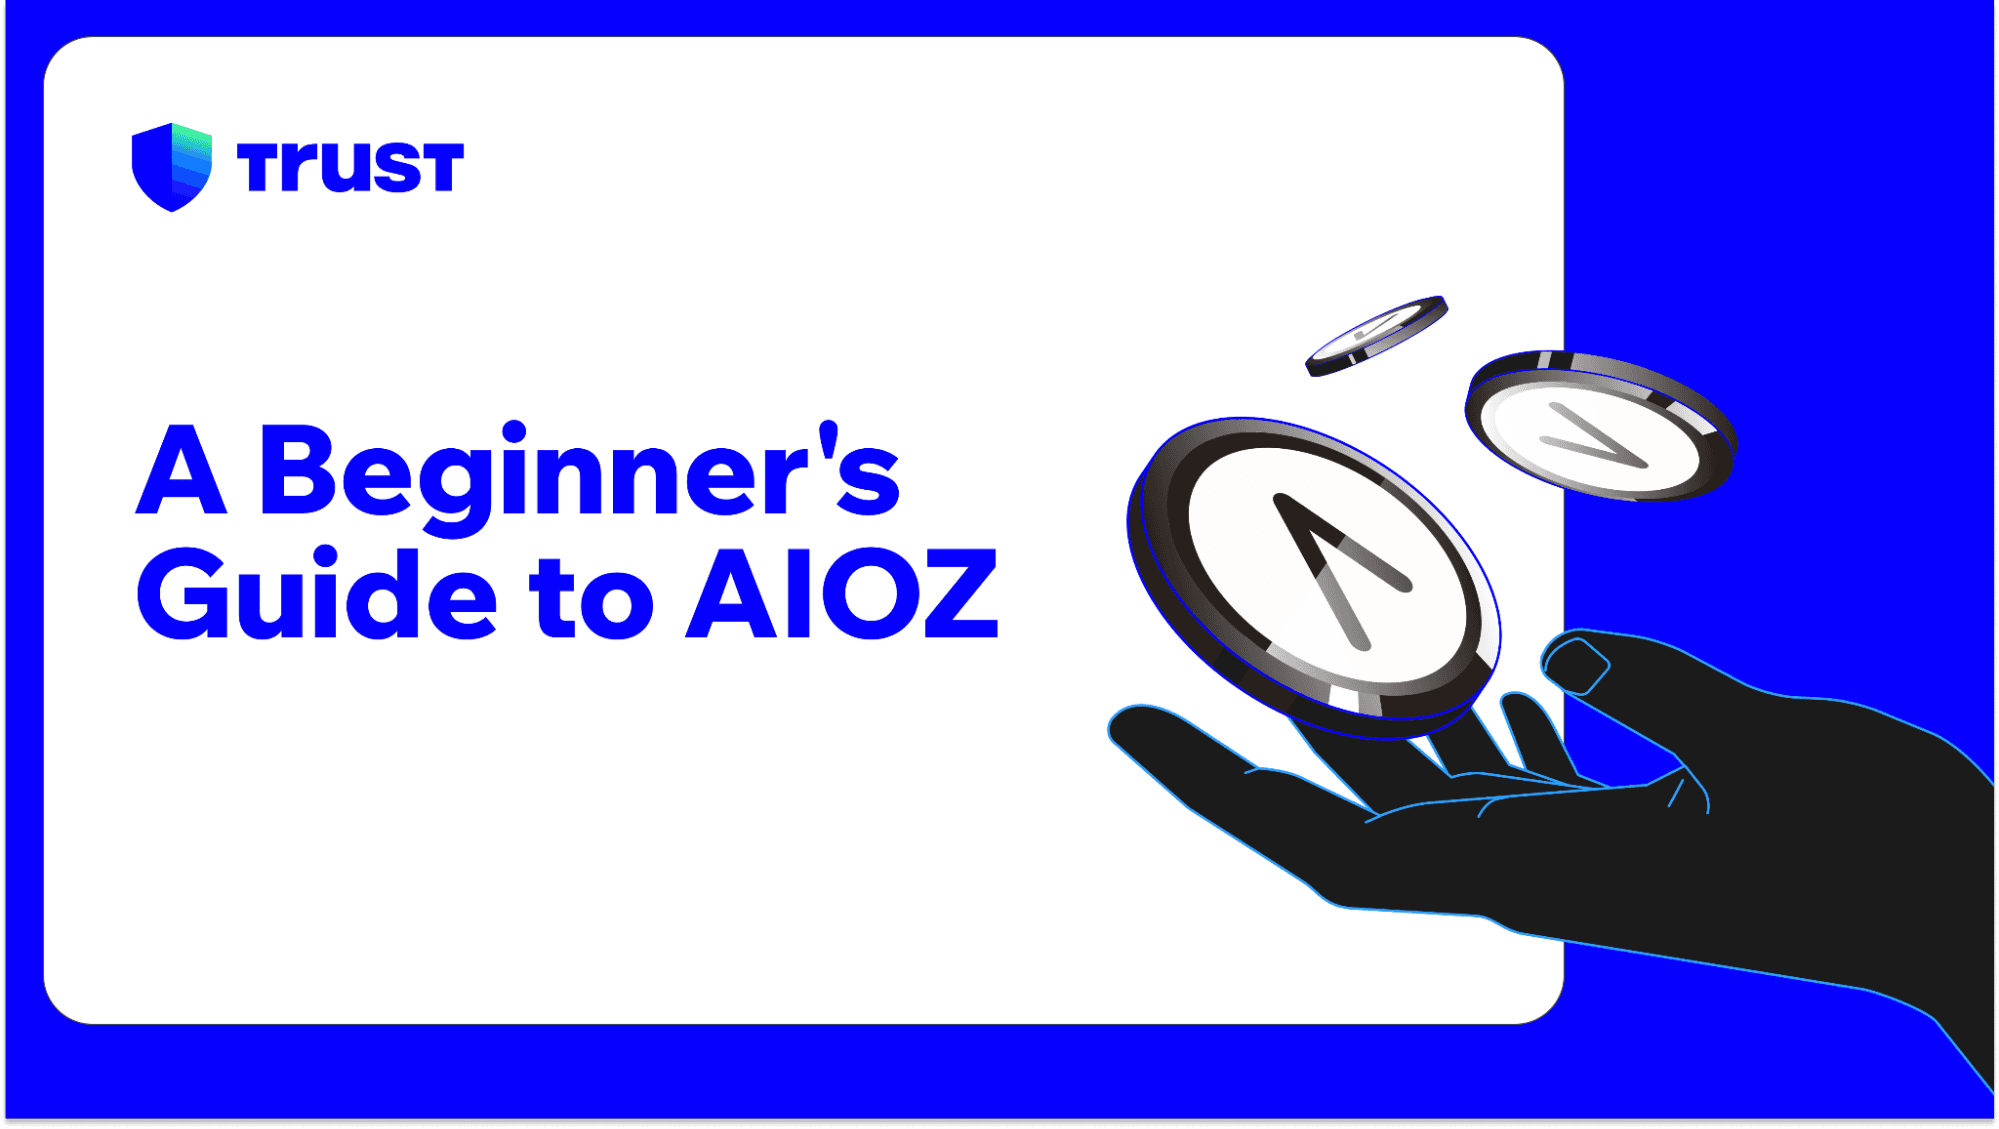 A Beginner's Guide to AIOZ